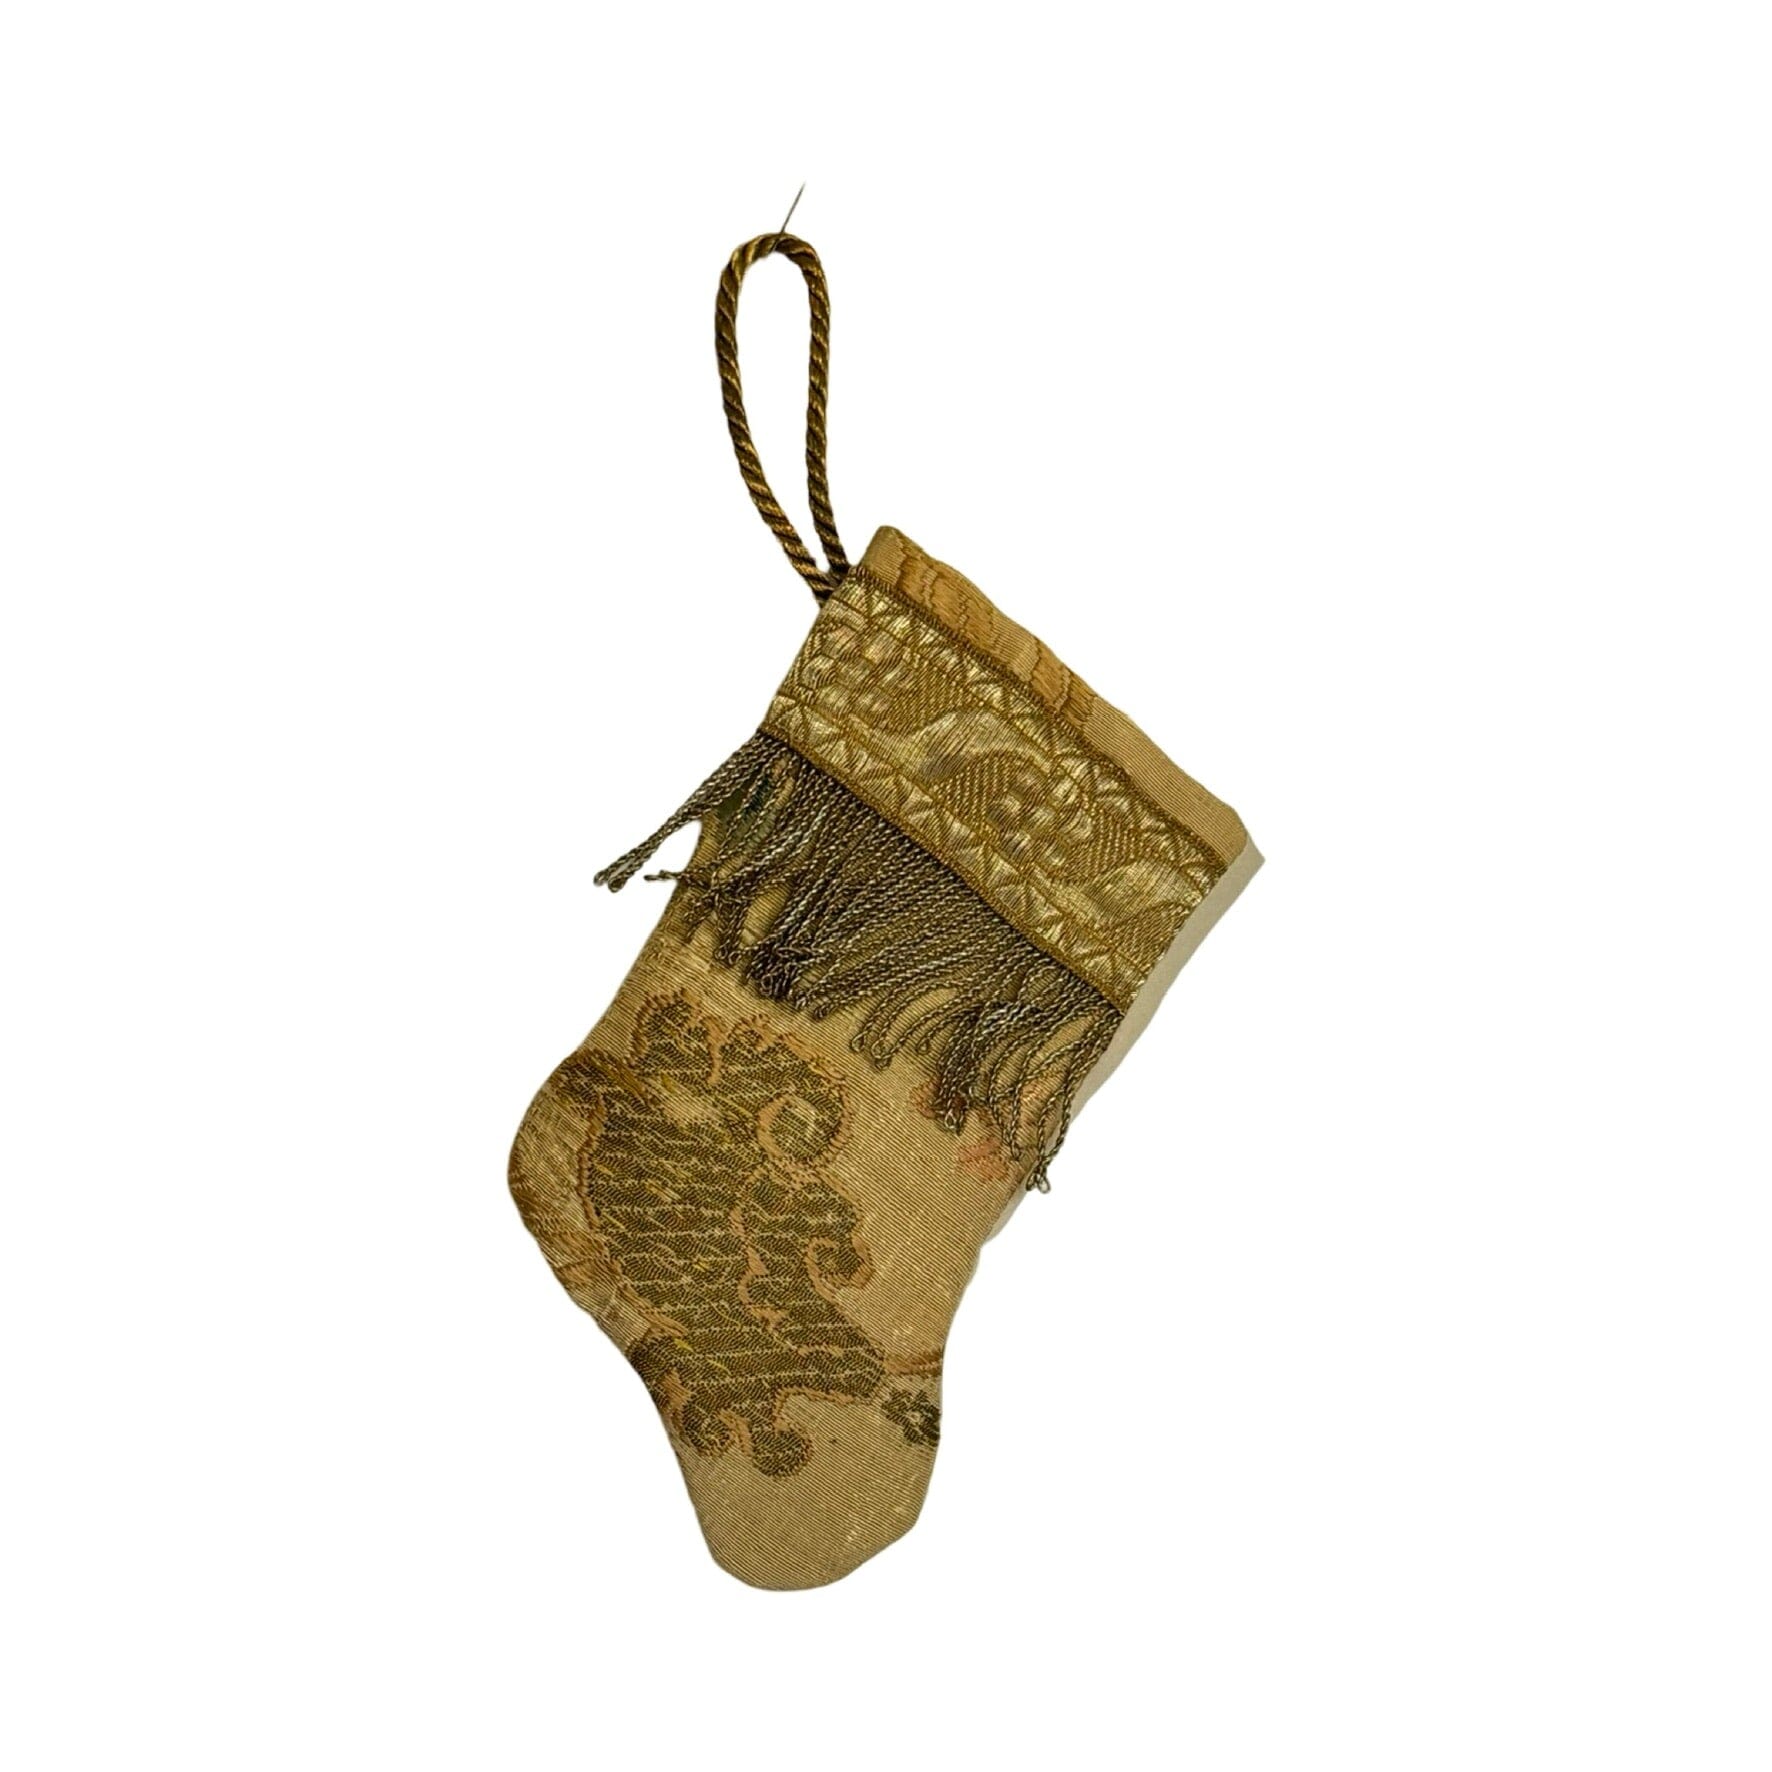 Handmade Mini Stocking Made From Vintage Fabric and Trims- Champagne Embroidery Ornament B. Viz Design C 